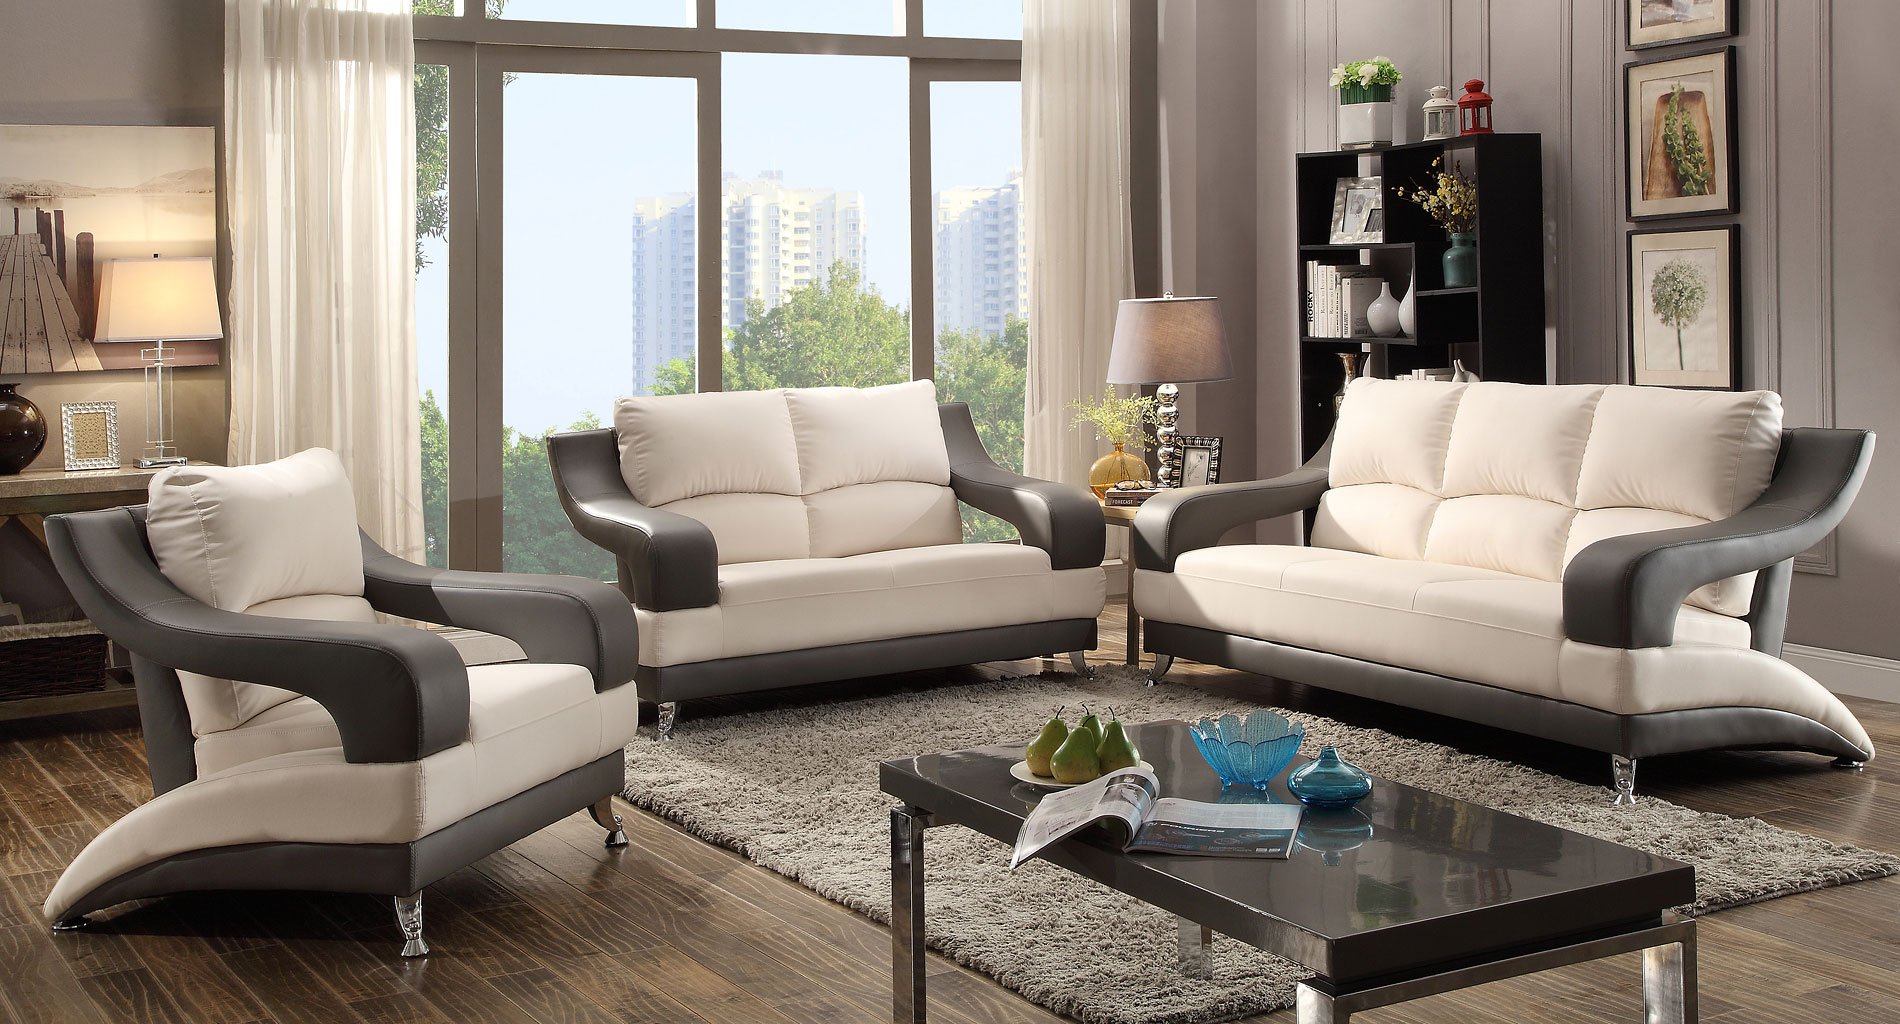 G259 Modern Living Room Set (White and Gray) by Glory Furniture